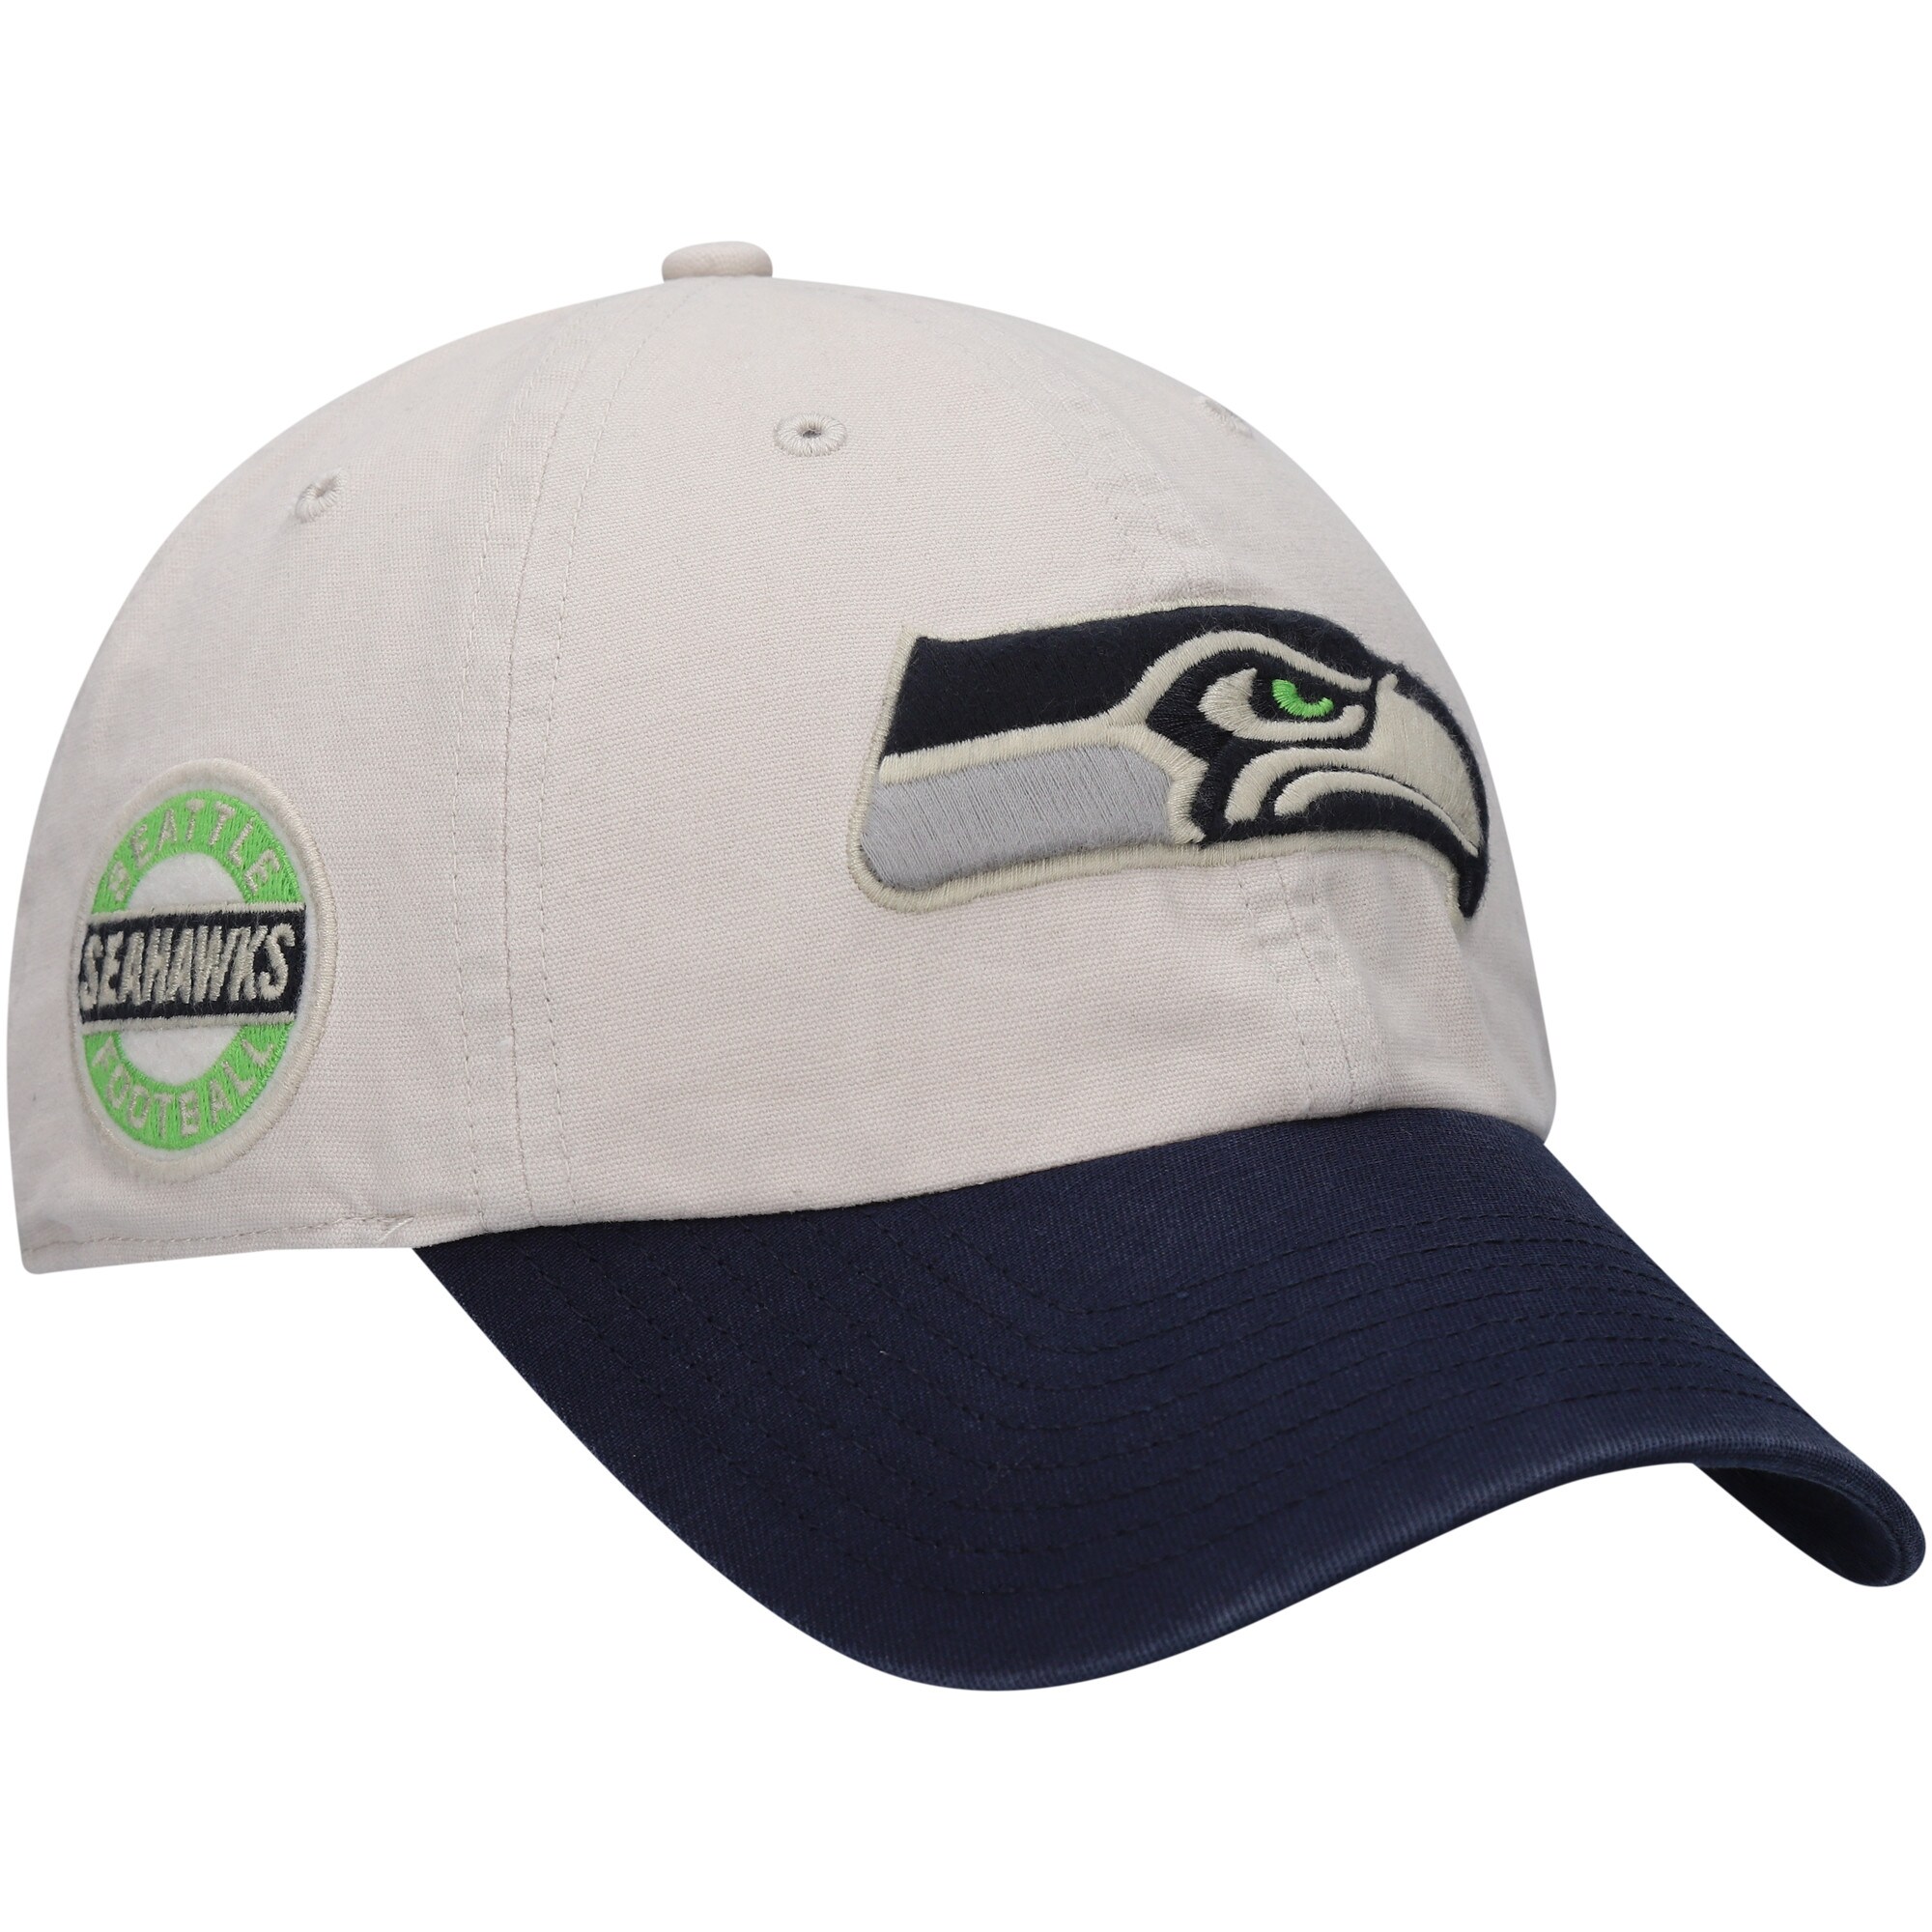 Finish off every Seattle Seahawks outfit with this Sidestep Clean Up adjustable hat from '47. The embroidered team logo on the front and side patch offer a vintage look that you'll want to sport to show off your unwavering fandom. The low crown and curved bill provide the look and feel of a classic cap, making it the perfect option to wear on Seattle Seahawks game day.Material: 100% CottonImportedCurved billEmbroidered graphics with raised detailOfficially licensedBrand: '47One size fits mostLow crownUnstructured relaxed fitWipe clean with a damp clothEmbroidered fabric appliqueSix solid panels with eyeletsAdjustable fabric strap with snap buckle